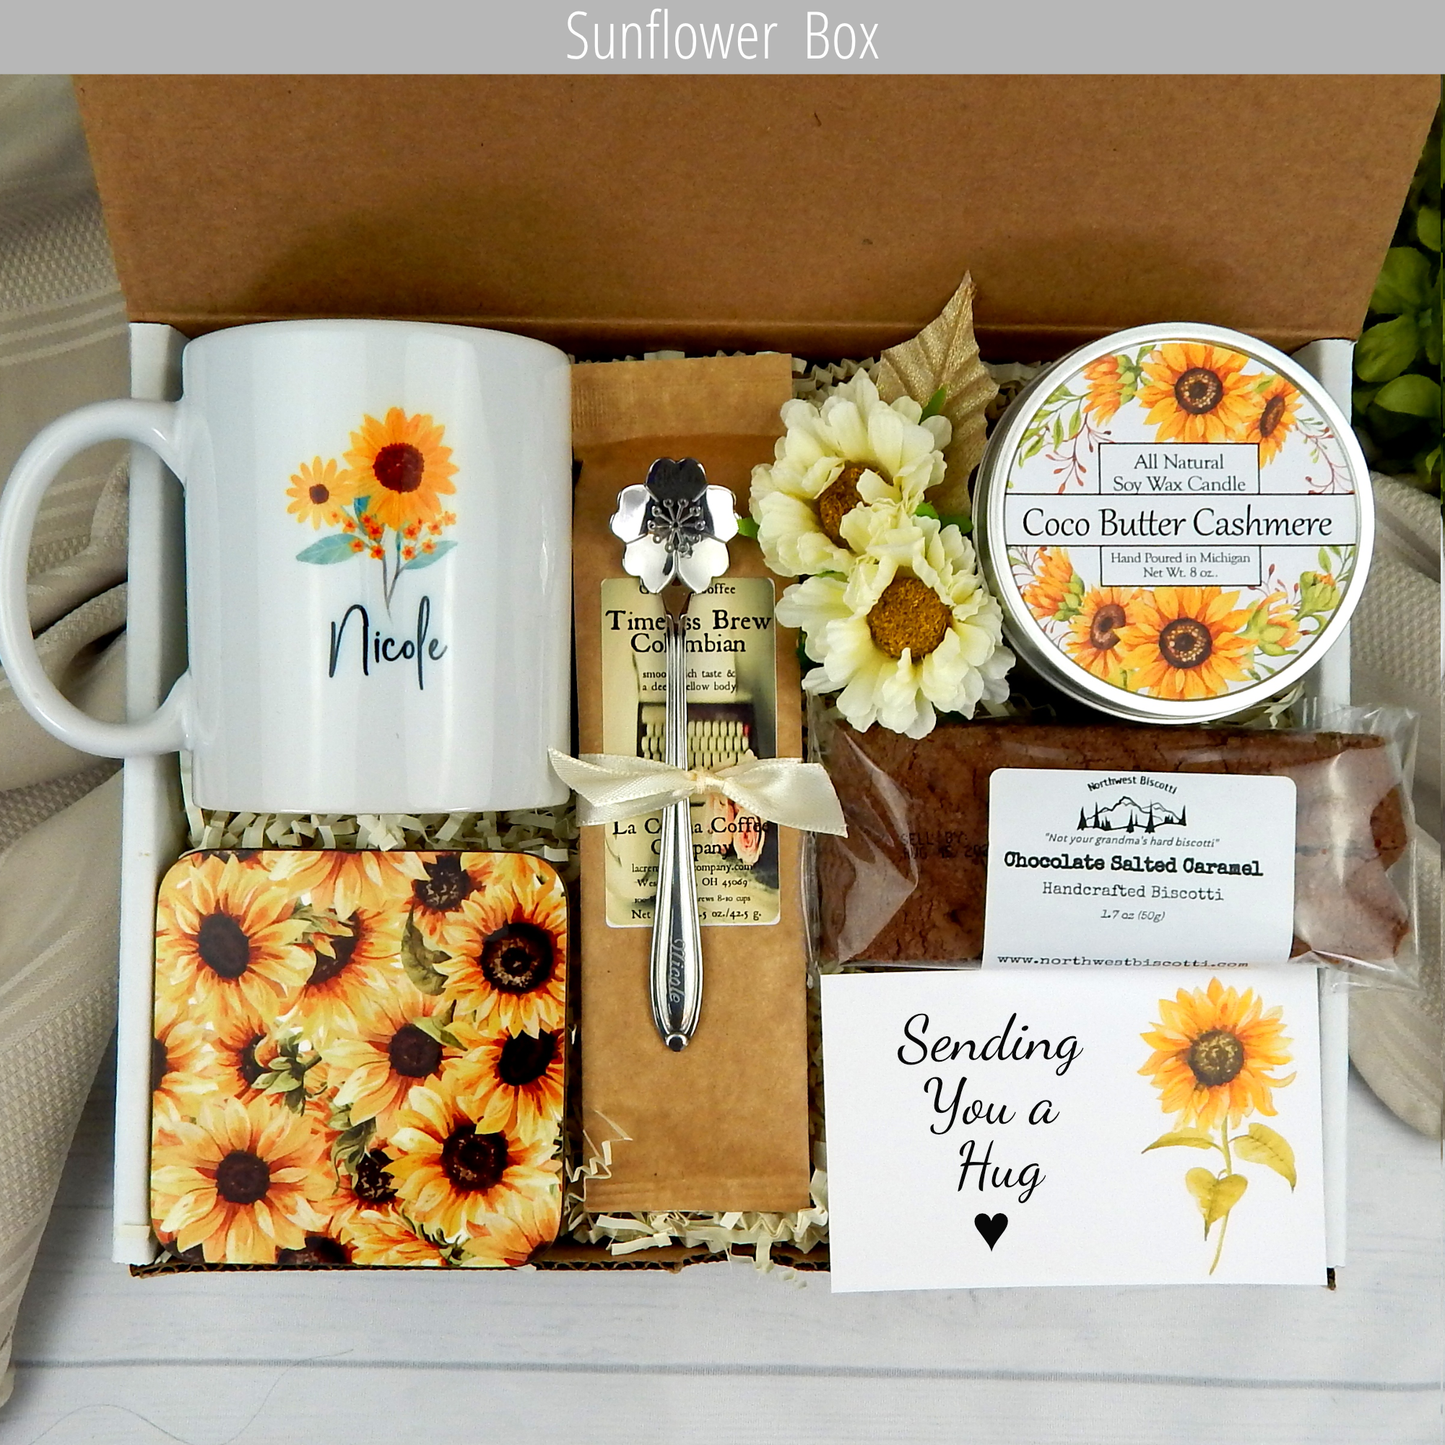 Warm encouragement: Gift basket for her with a personalized mug, coffee, and comforting treats to send hugs.